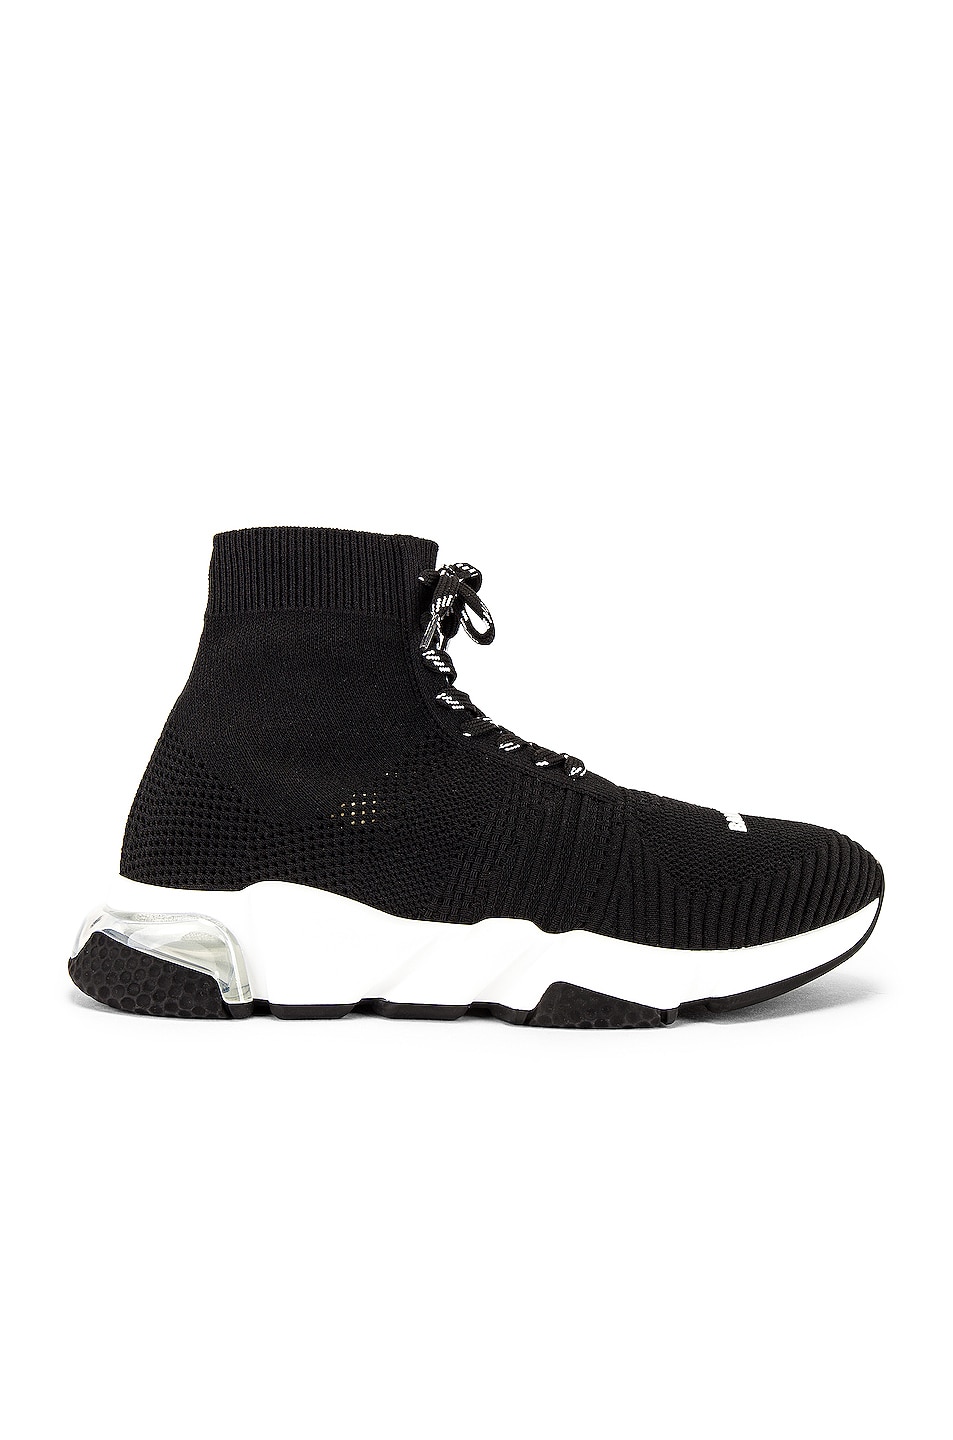 Image 1 of Balenciaga Speed Lace Up Sneaker in Black & White & Clear & Black